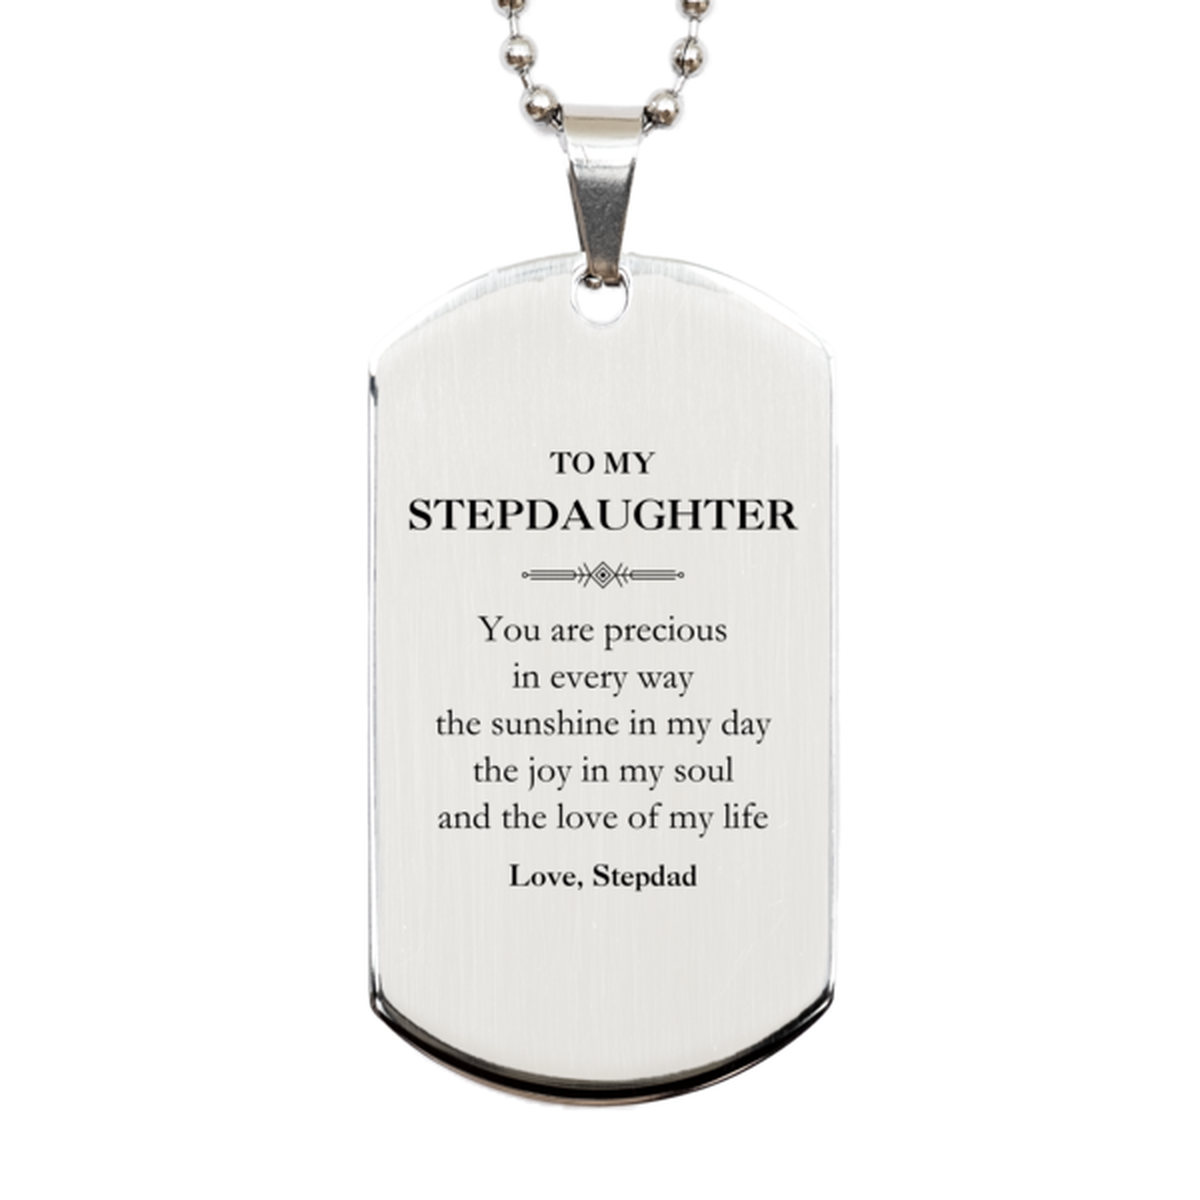 Graduation Gifts for Stepdaughter Silver Dog Tag Present from Stepdad, Christmas Stepdaughter Birthday Gifts Stepdaughter You are precious in every way the sunshine in my day. Love, Stepdad